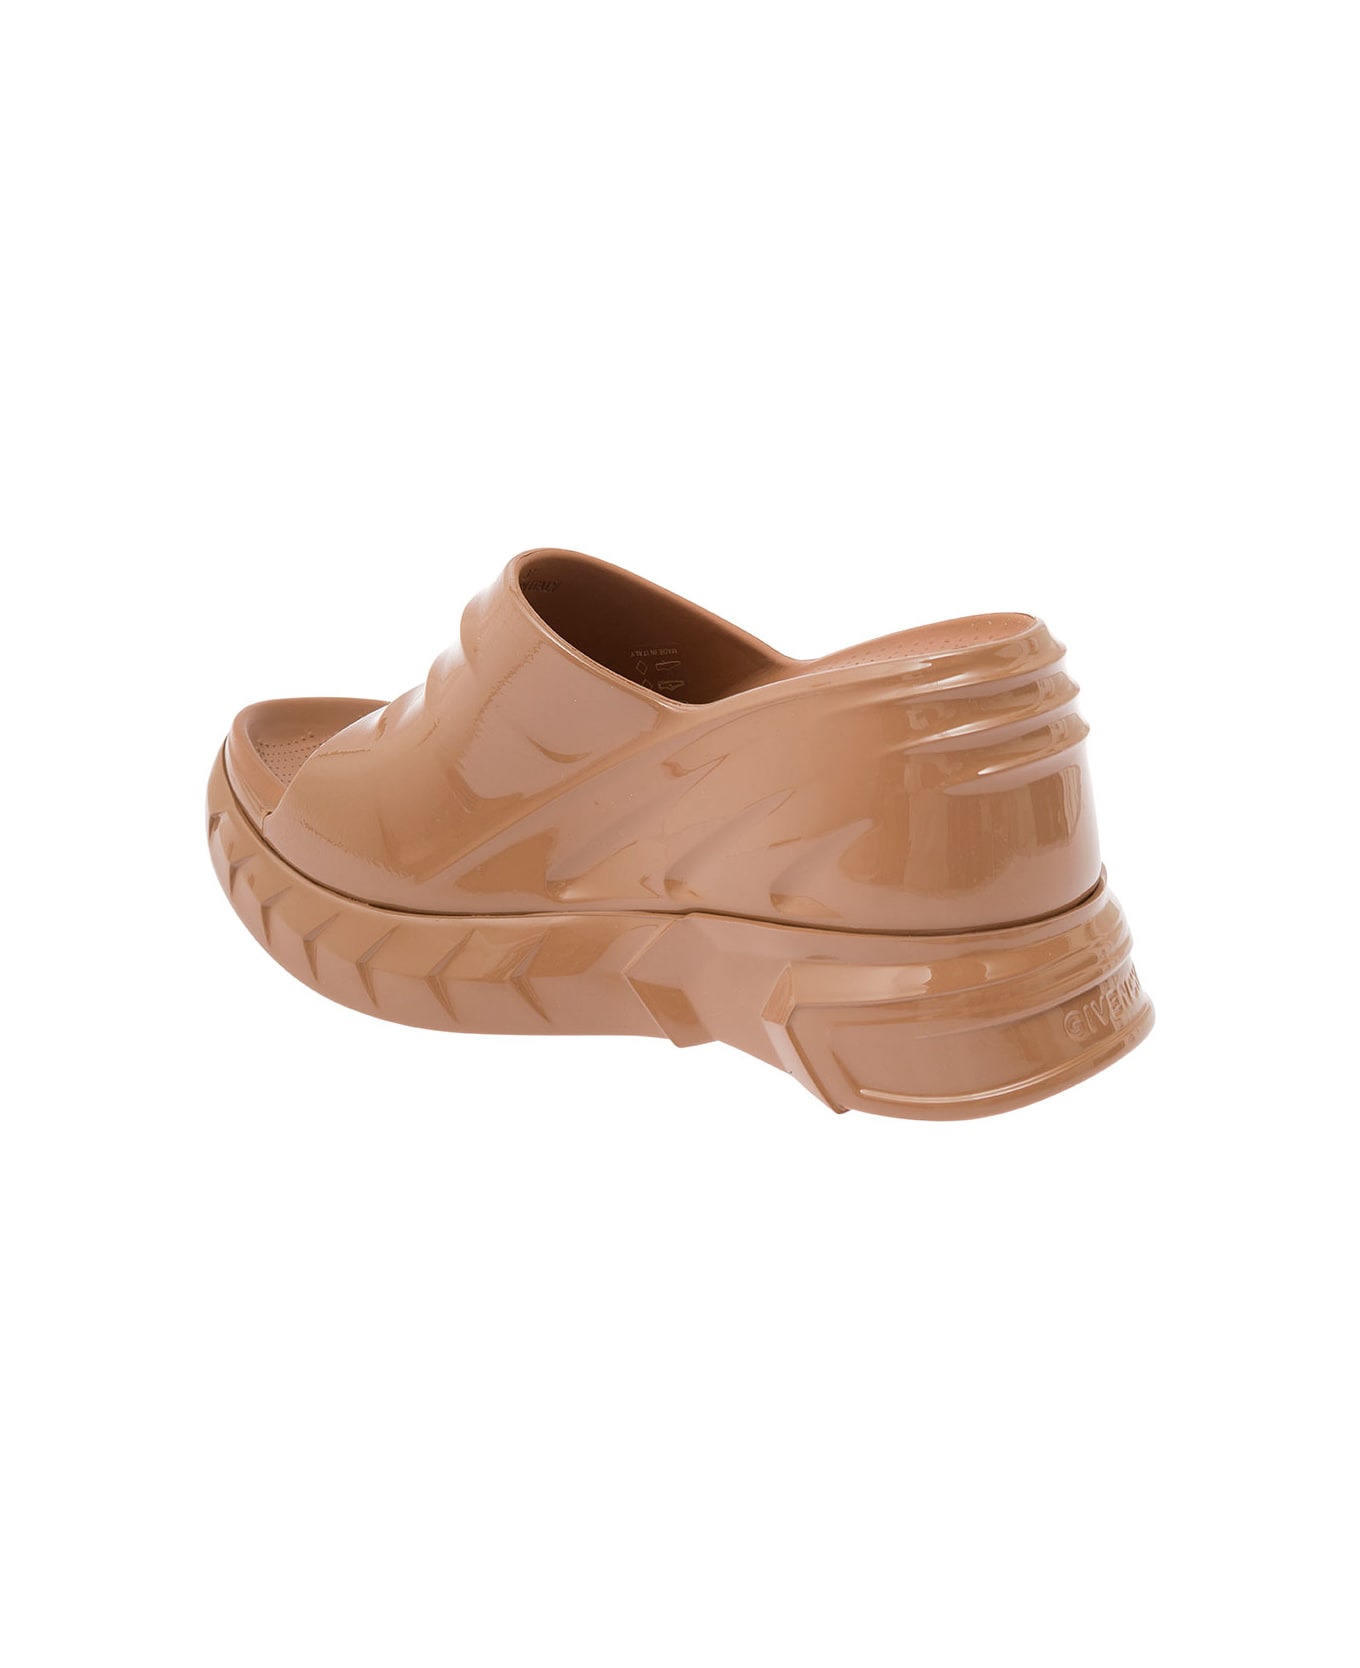 Givenchy Clay Color 'marshmallow' Wedge In Rubber Woman - Beige